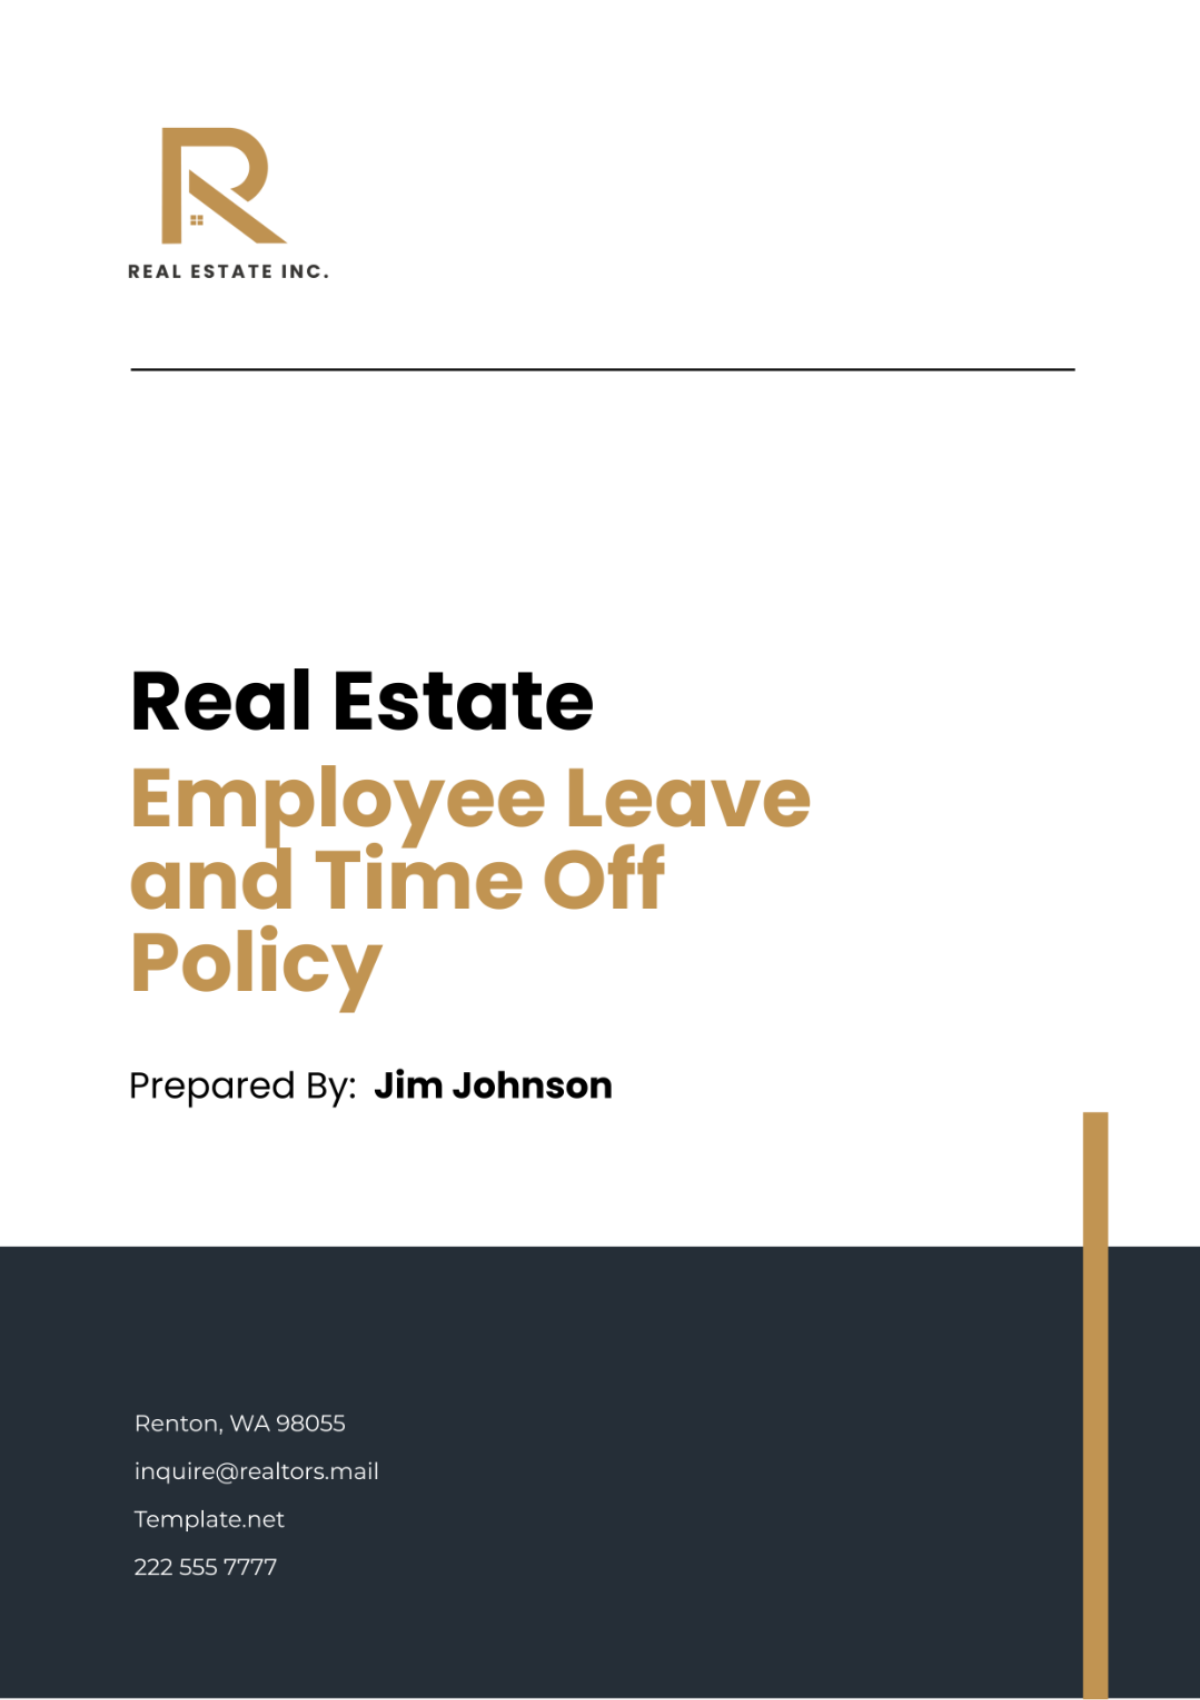 Free Real Estate Employee Leave and Time Off Policy Template